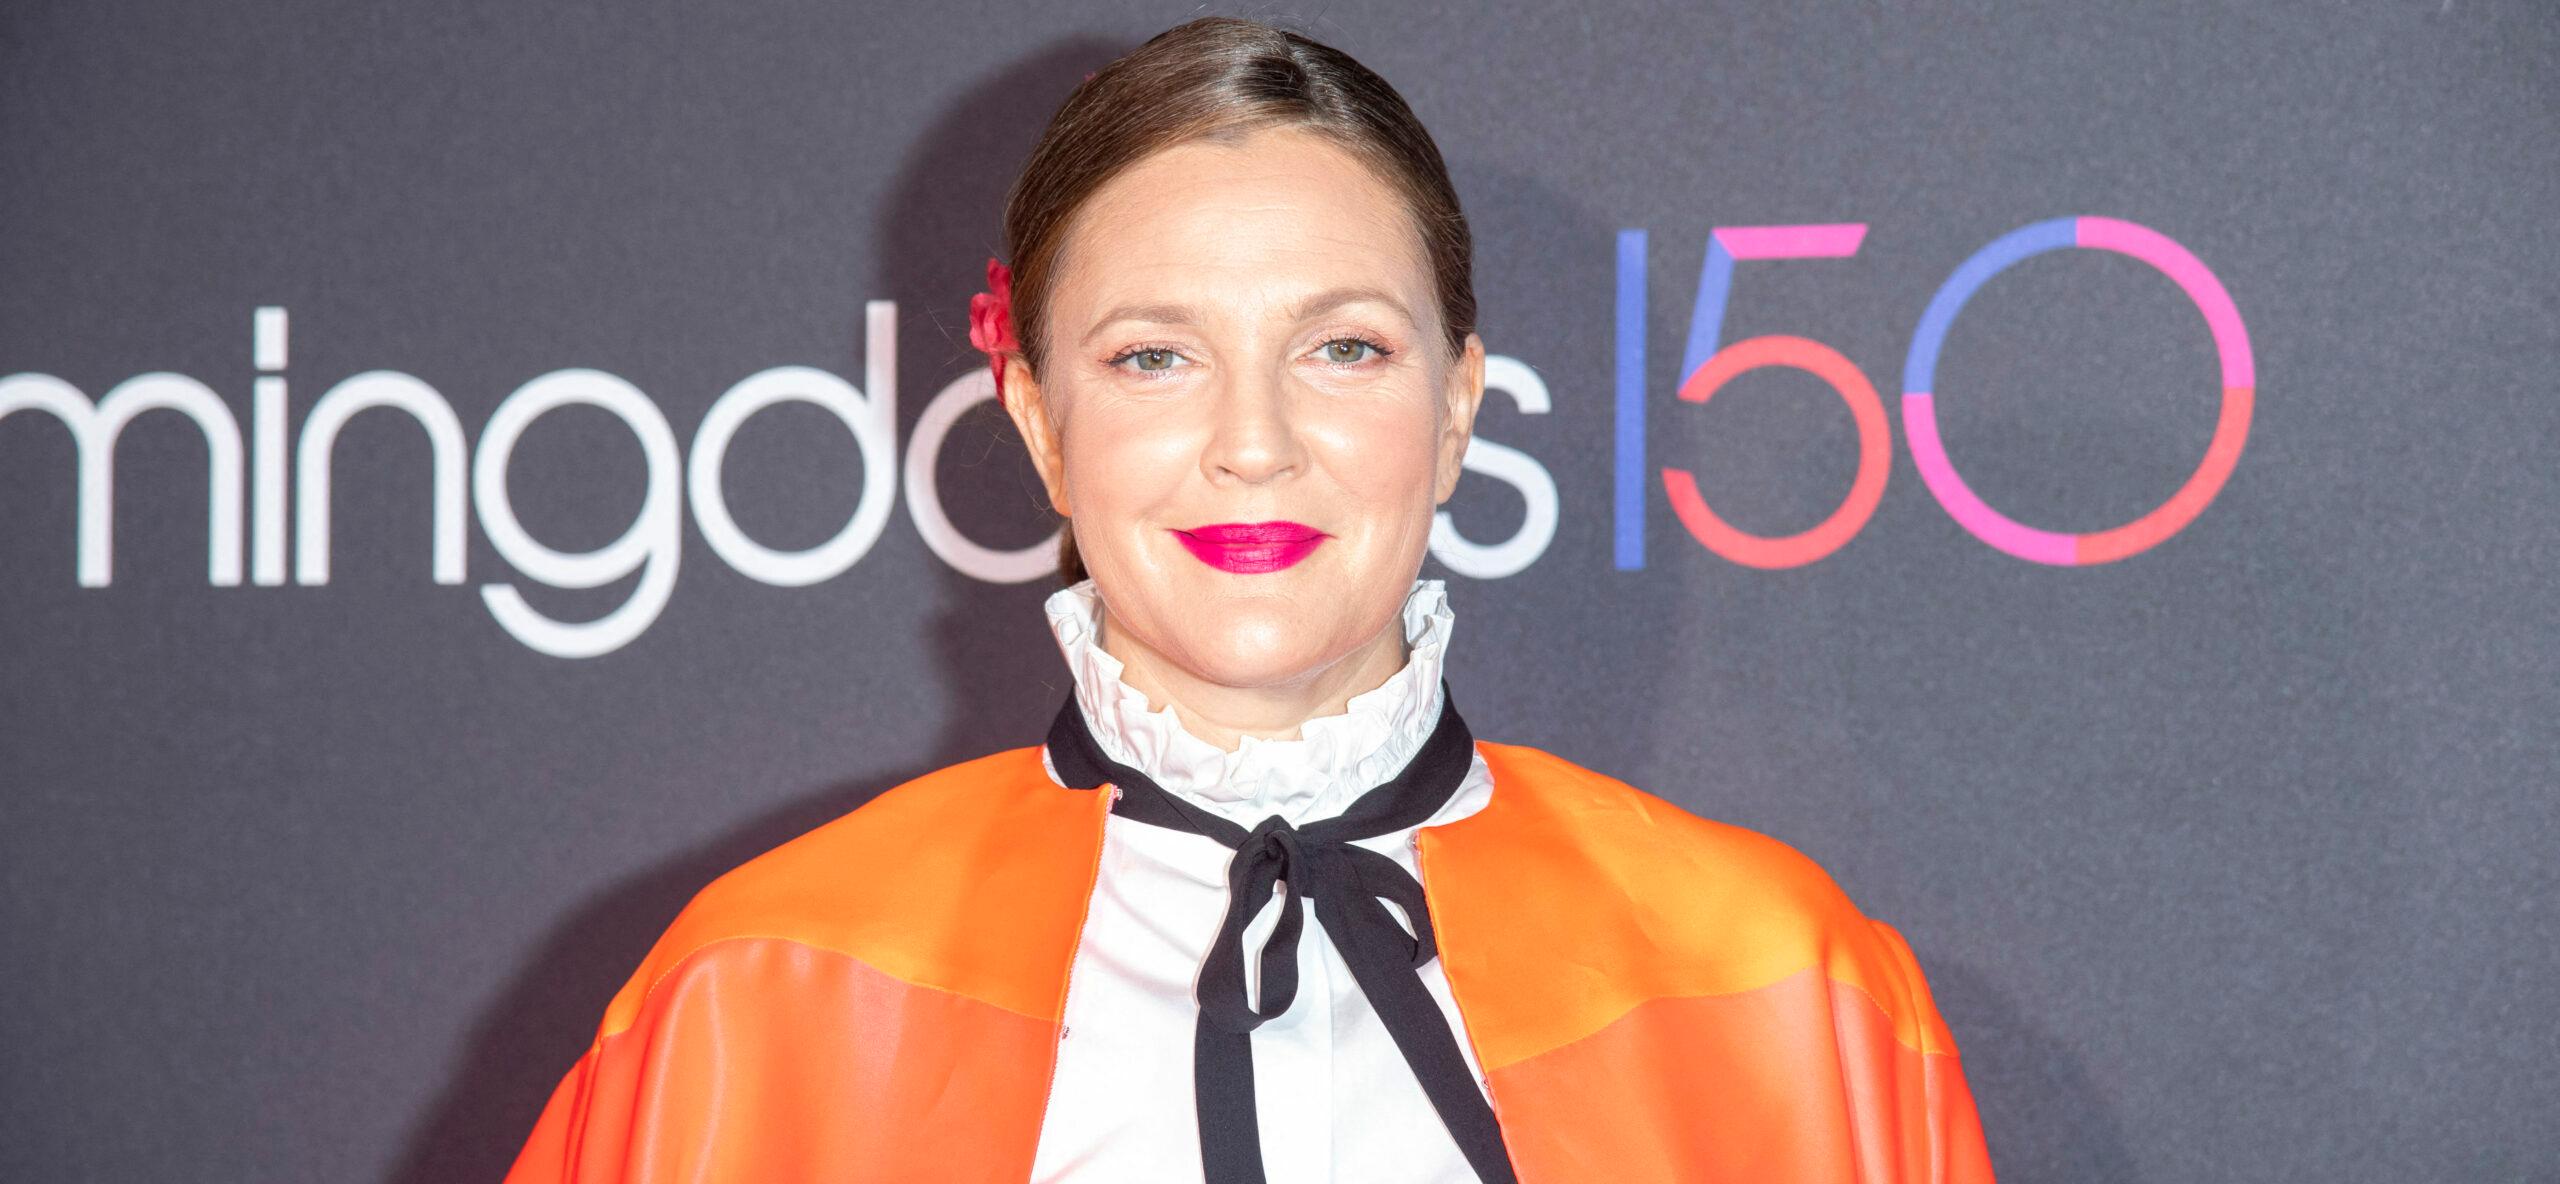 Drew Barrymore Recalls Therapist Quitting On Her Over Intense Post-Divorce Struggle With Alcohol